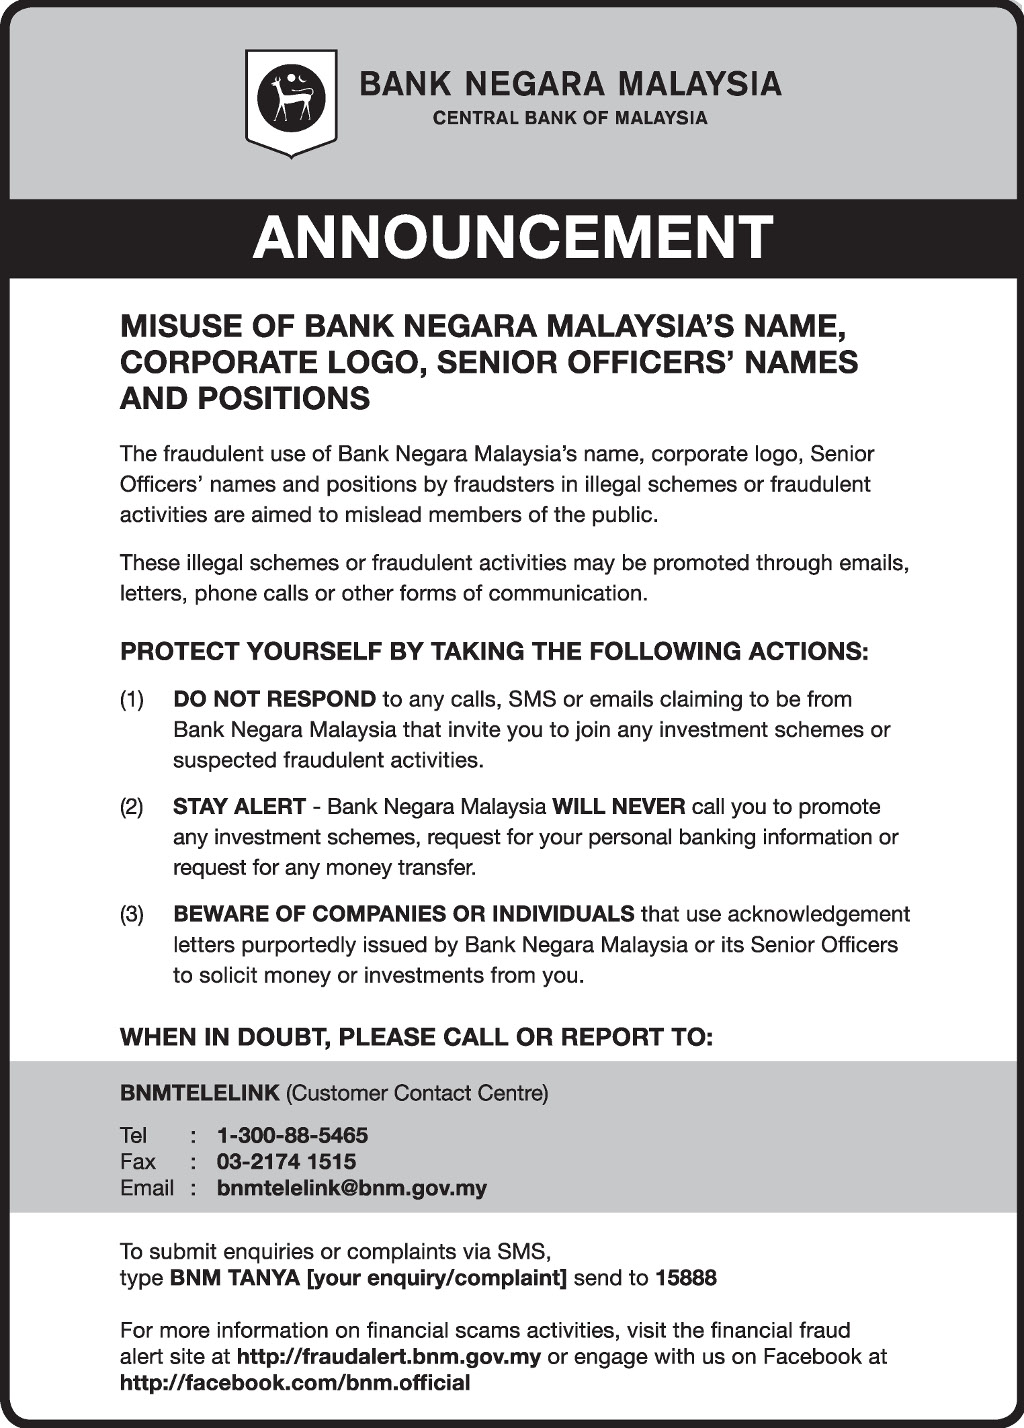 Bank Negara's notice about frauds and scams. Image from Bank Negara Malaysia